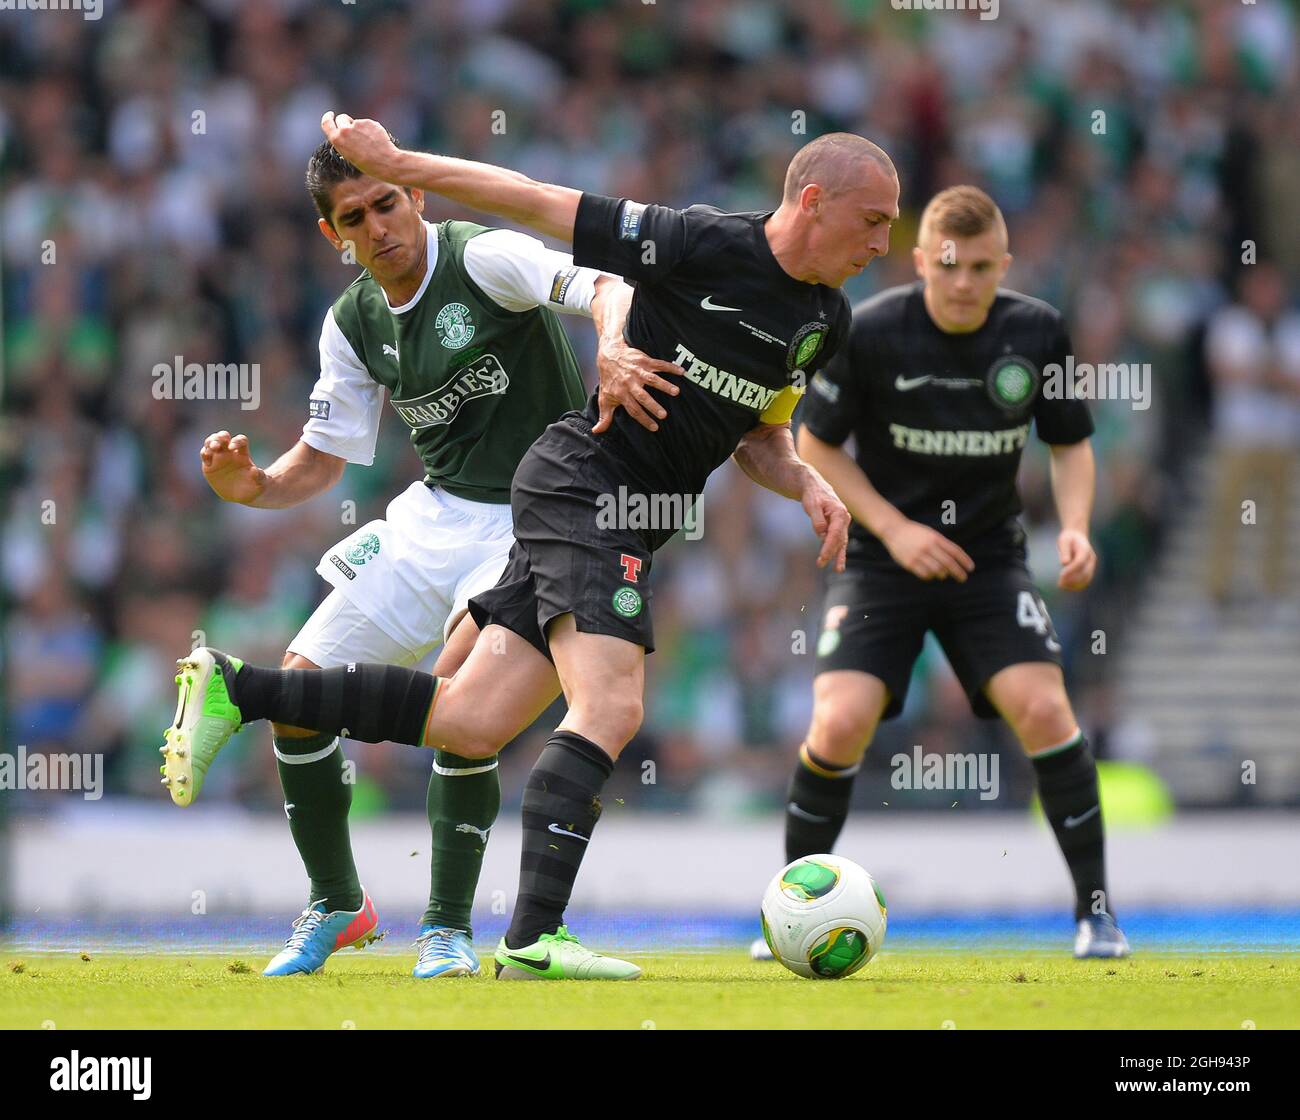 Celtic's Scott Brown holds off the challenge by Hibernian's Jorge Claros during the William Hill Scottish Cup Final between Hibernian and Celtic at the Hampden Park Stadium in Glasgow, Scotland on May 26, 2013. Picture Simon Bellis Stock Photo